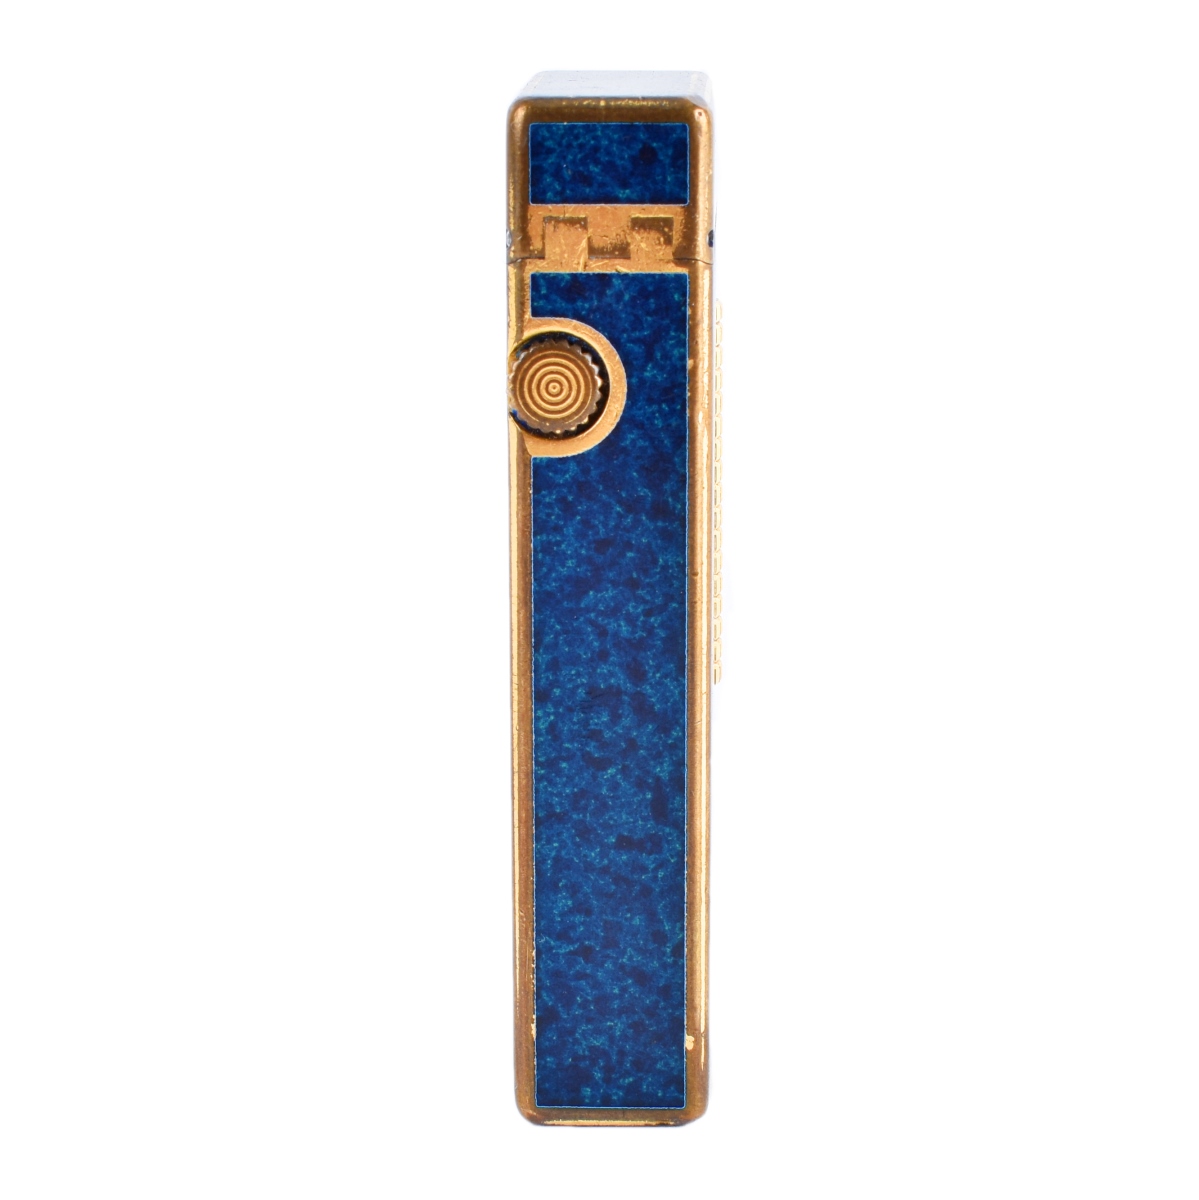 Dunhill Gold Plated & Lacquer Cigarette Lighter